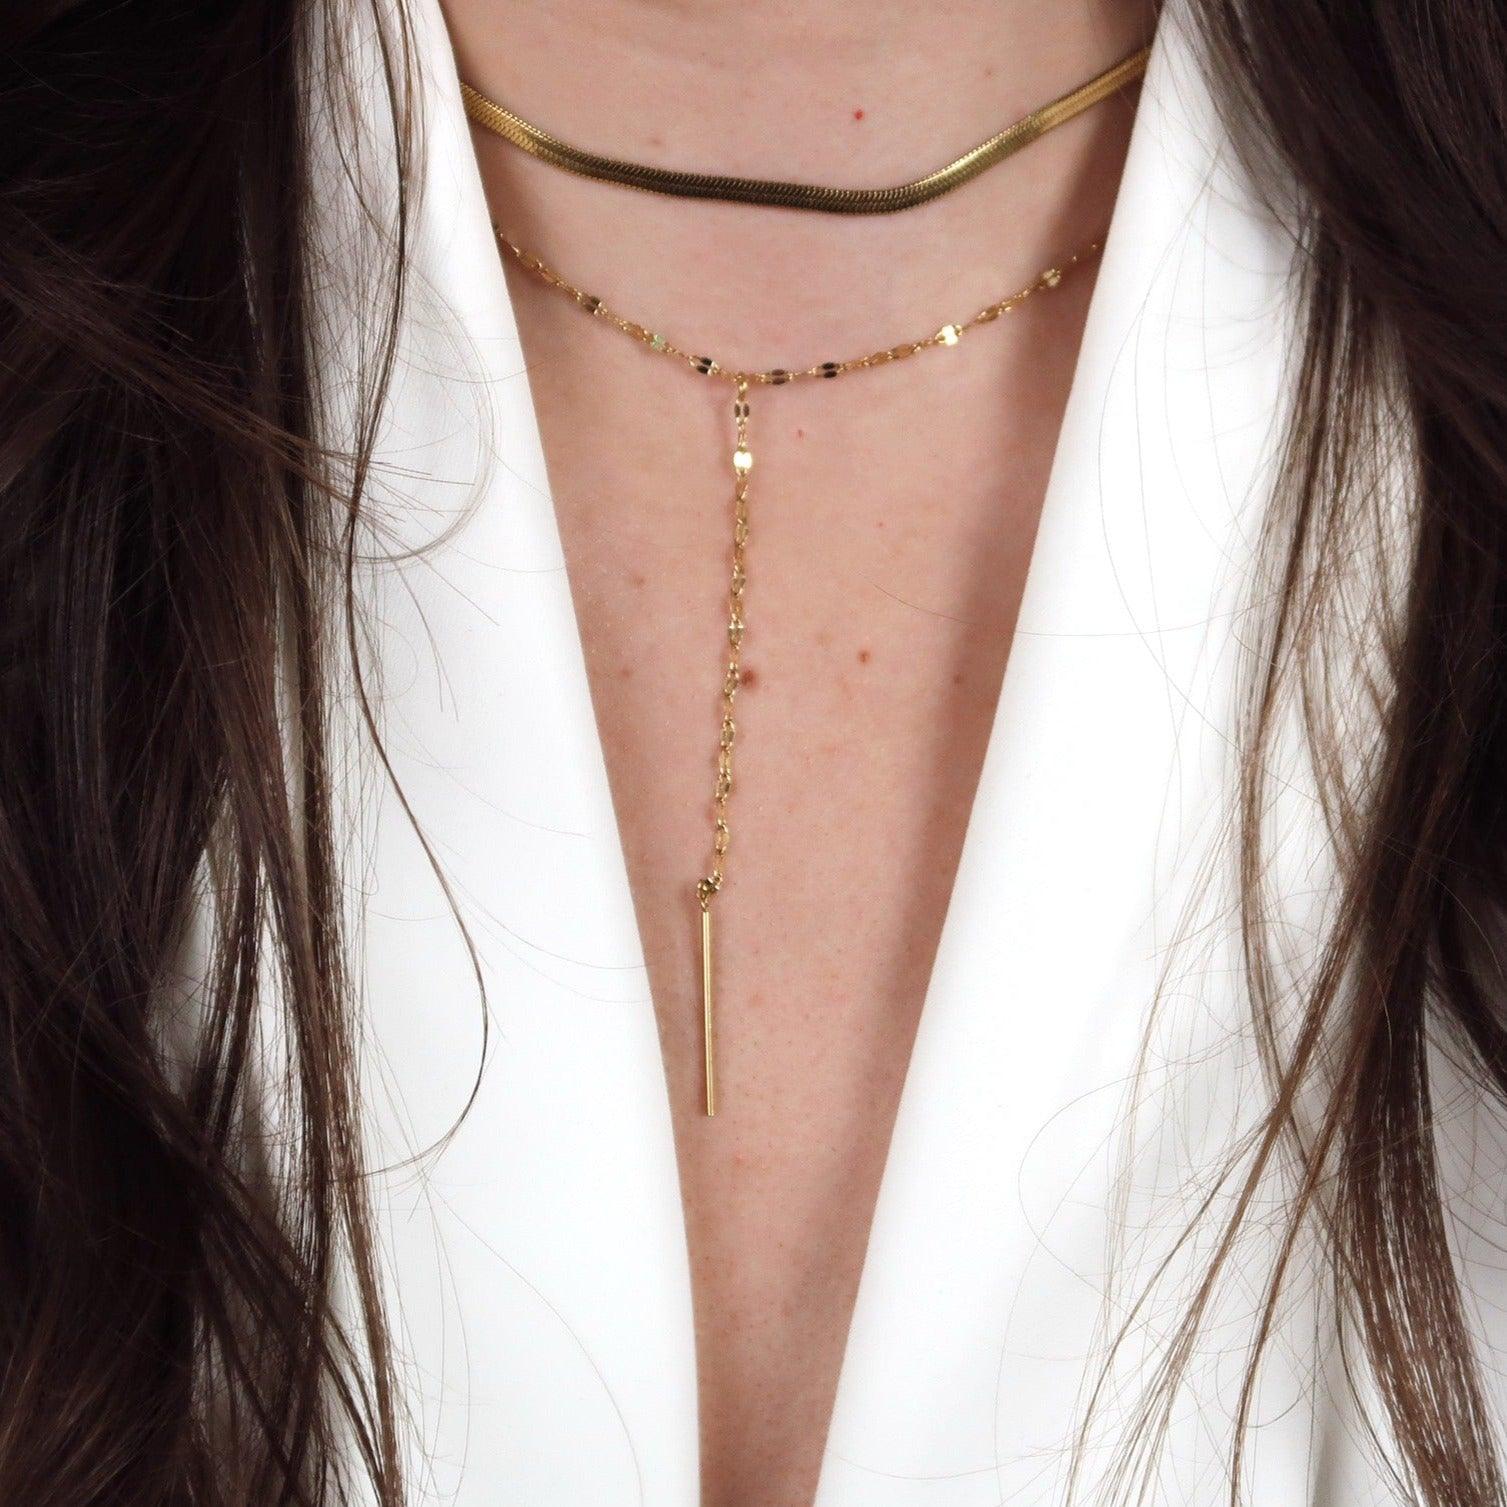 LISA - 18K PVD Gold Plated Herringbone and V-Shaped Chain Necklace - Mixed Metals